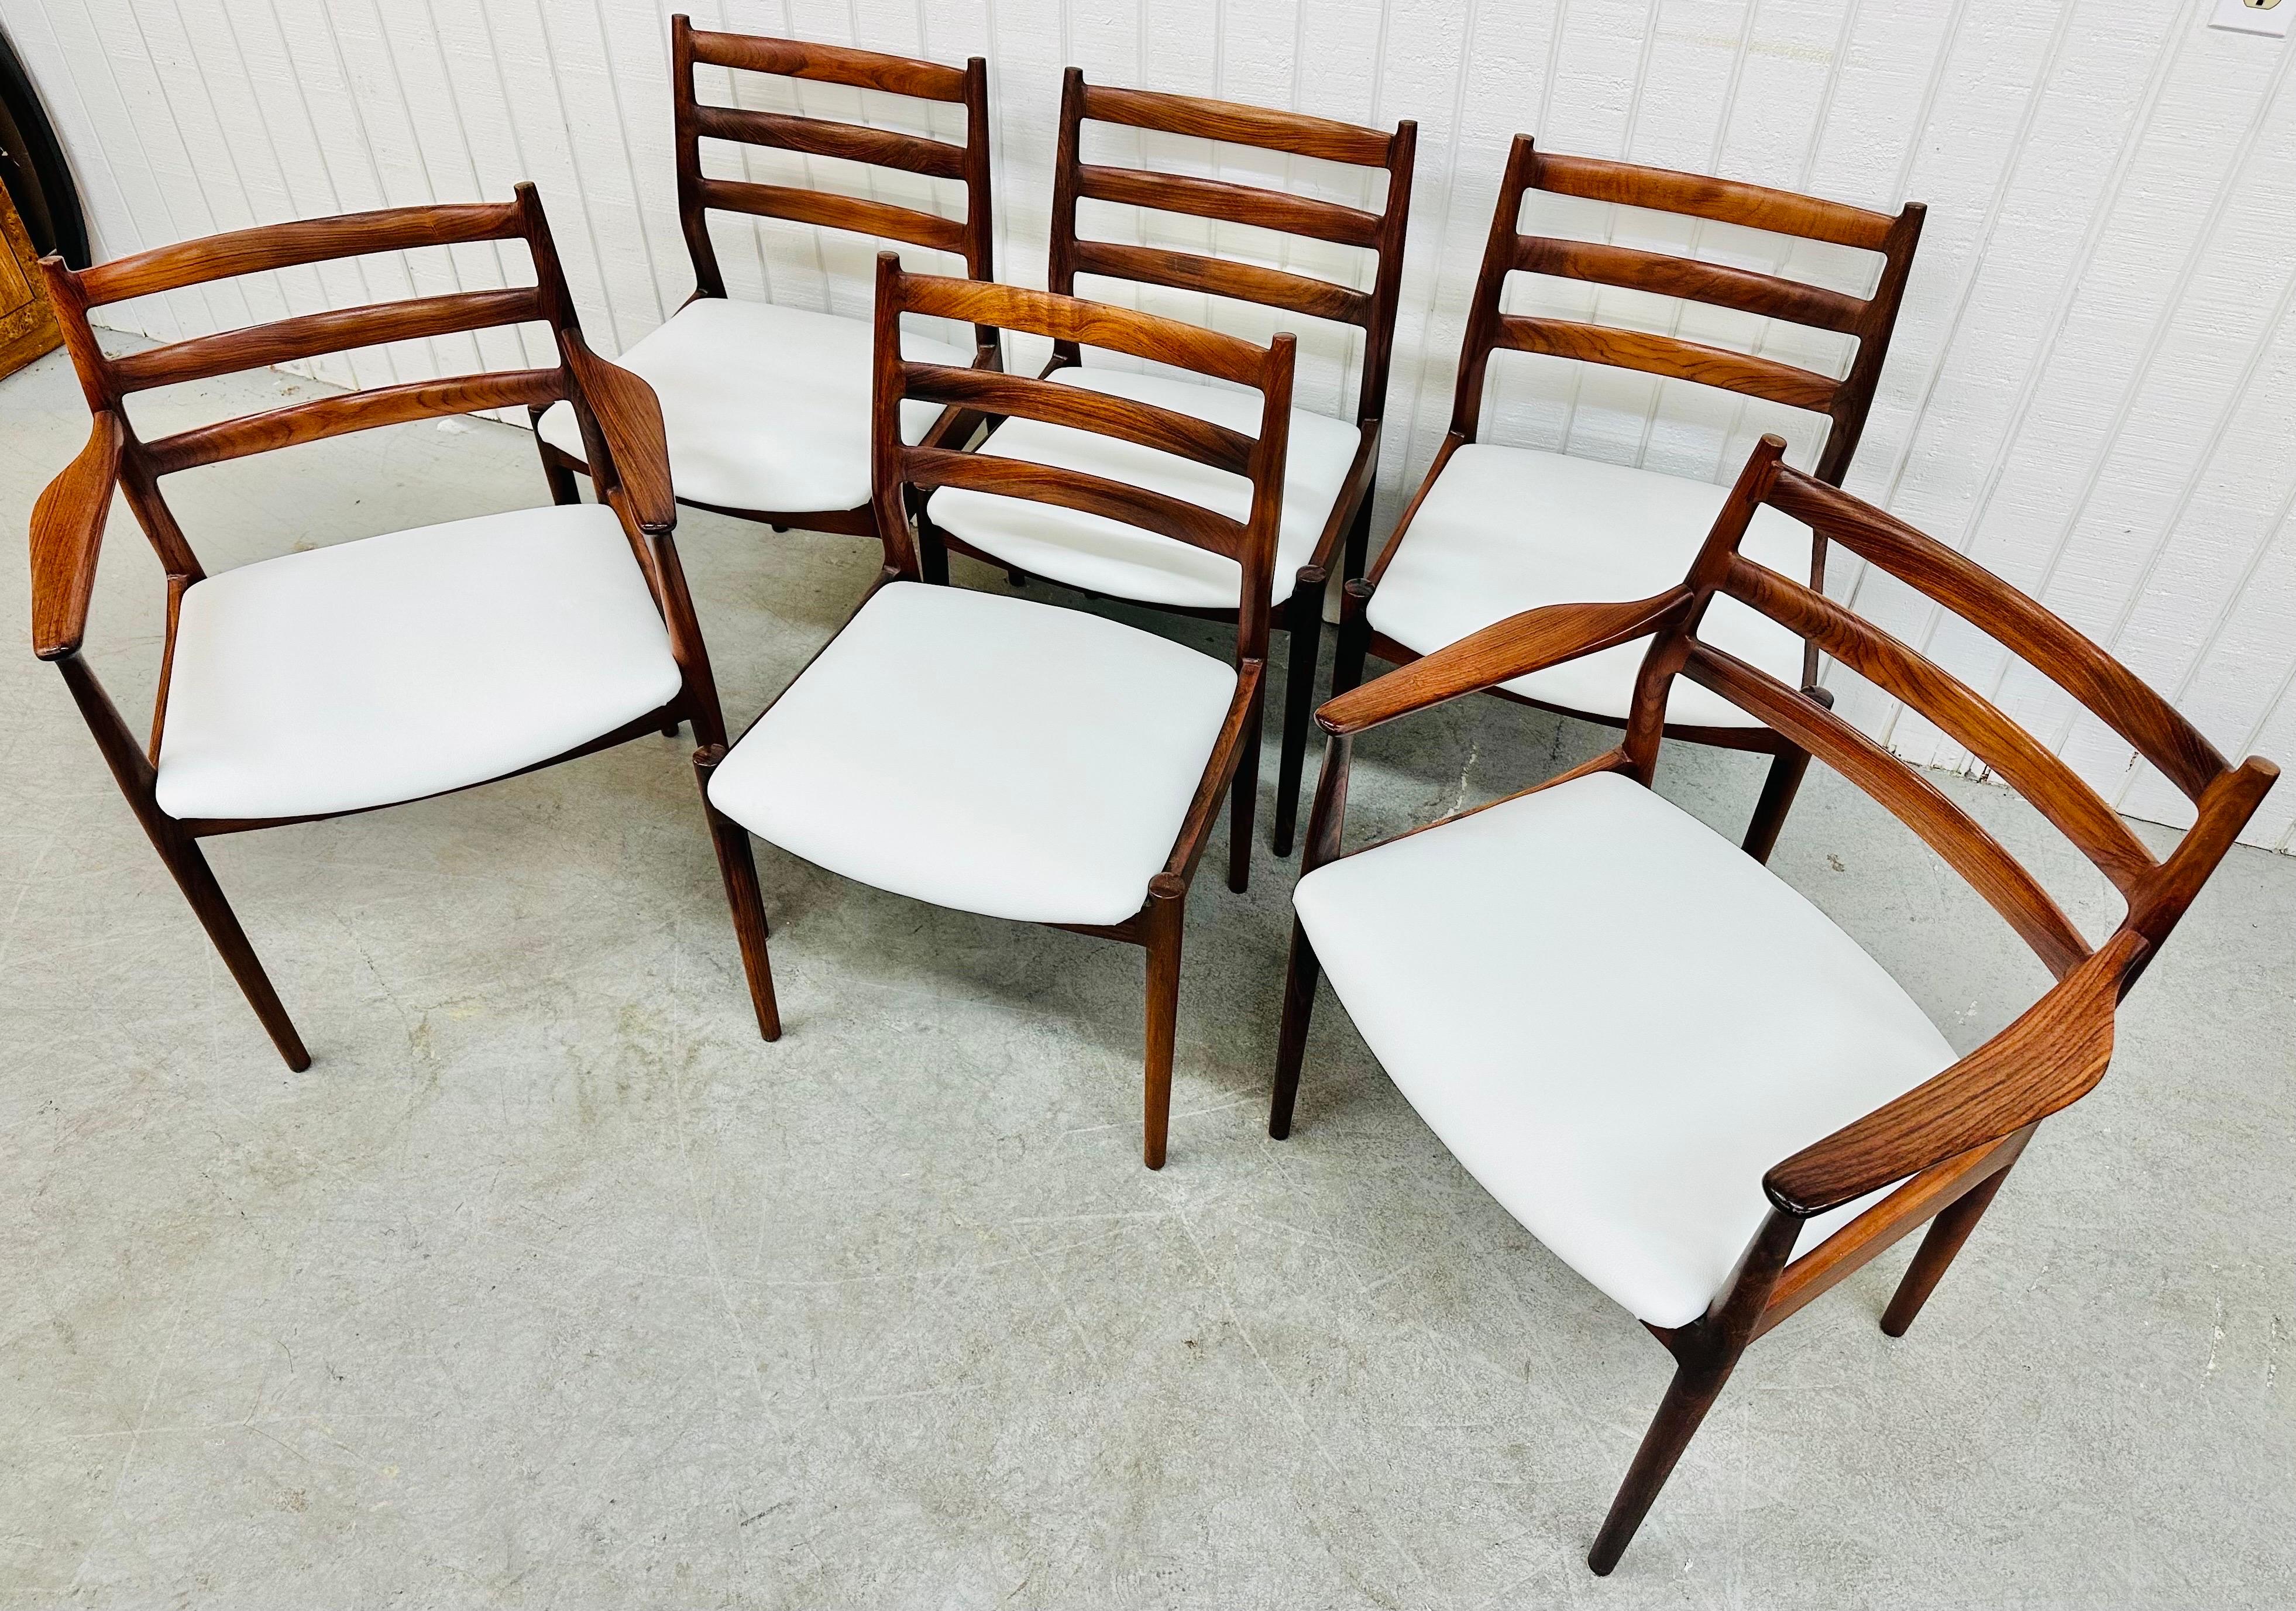 This listing is for a set of six Mid-Century Modern France & Son Danish Rosewood Dining Chairs. Featuring two arm chairs, four straight chairs, ladder backs, solid rosewood frames, new white vinyl upholstery, and a beautiful rosewood finish. This is